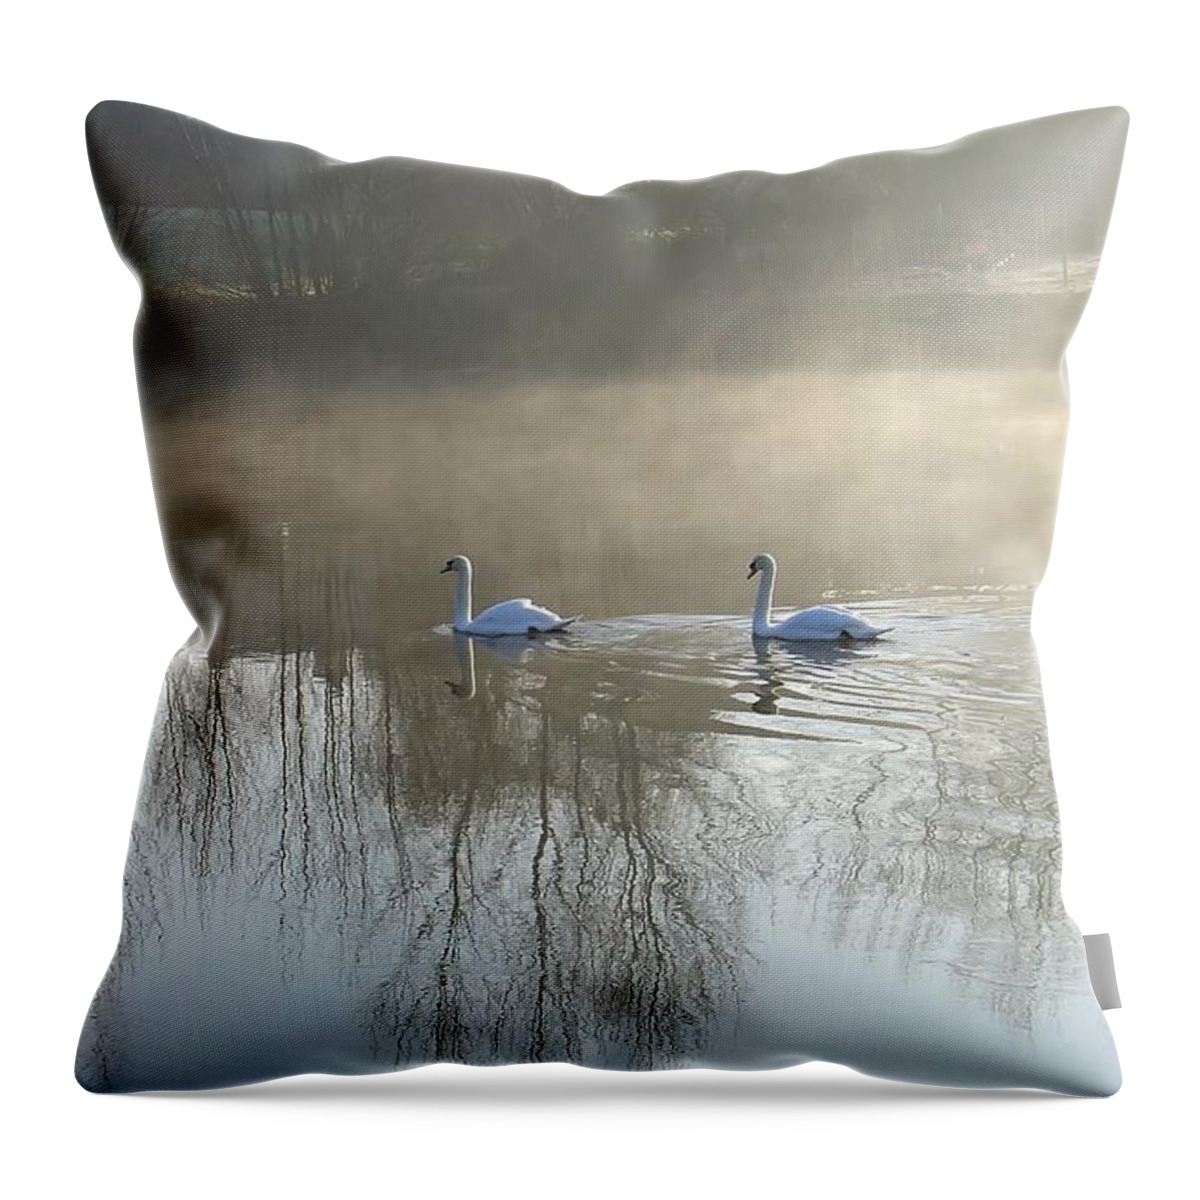 Europe Throw Pillow featuring the photograph Dawn Patrol by Rod Johnson